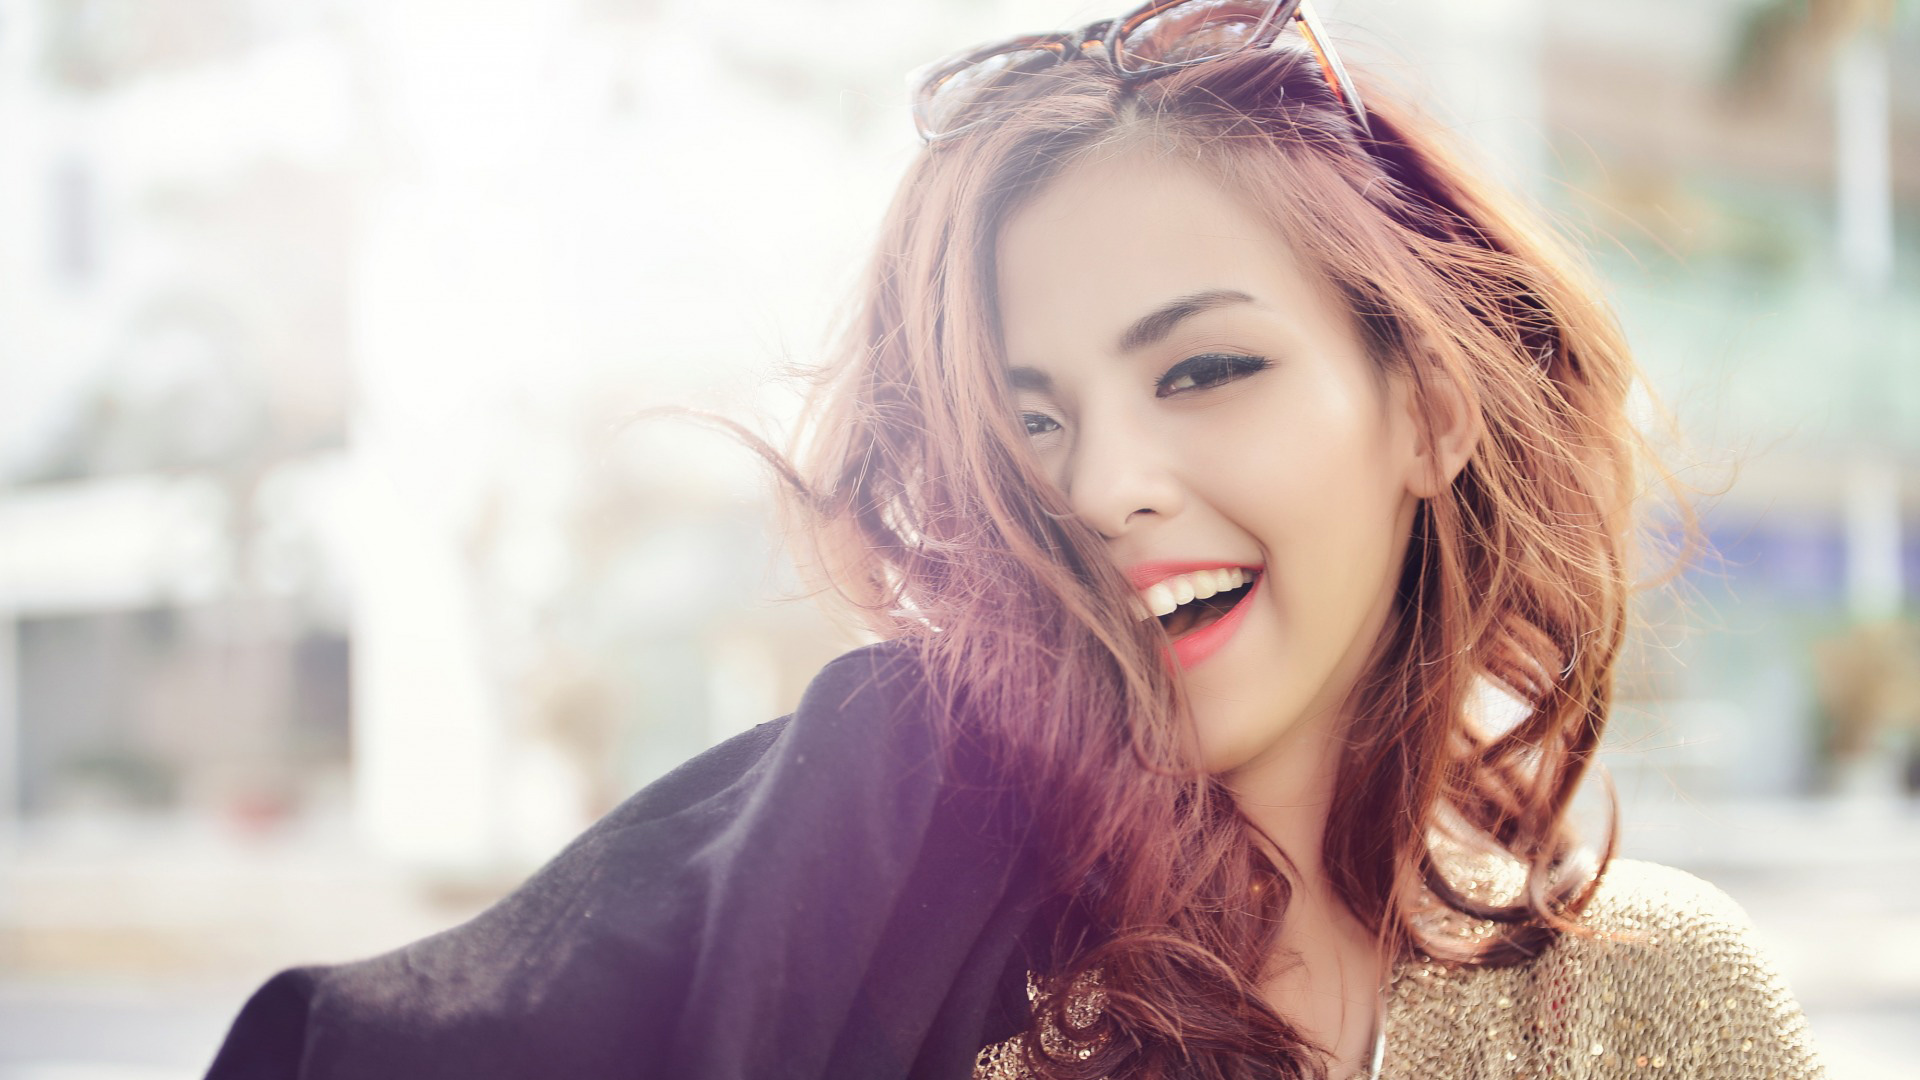 Face Girl Model Redhead Smile Woman 1920x1080